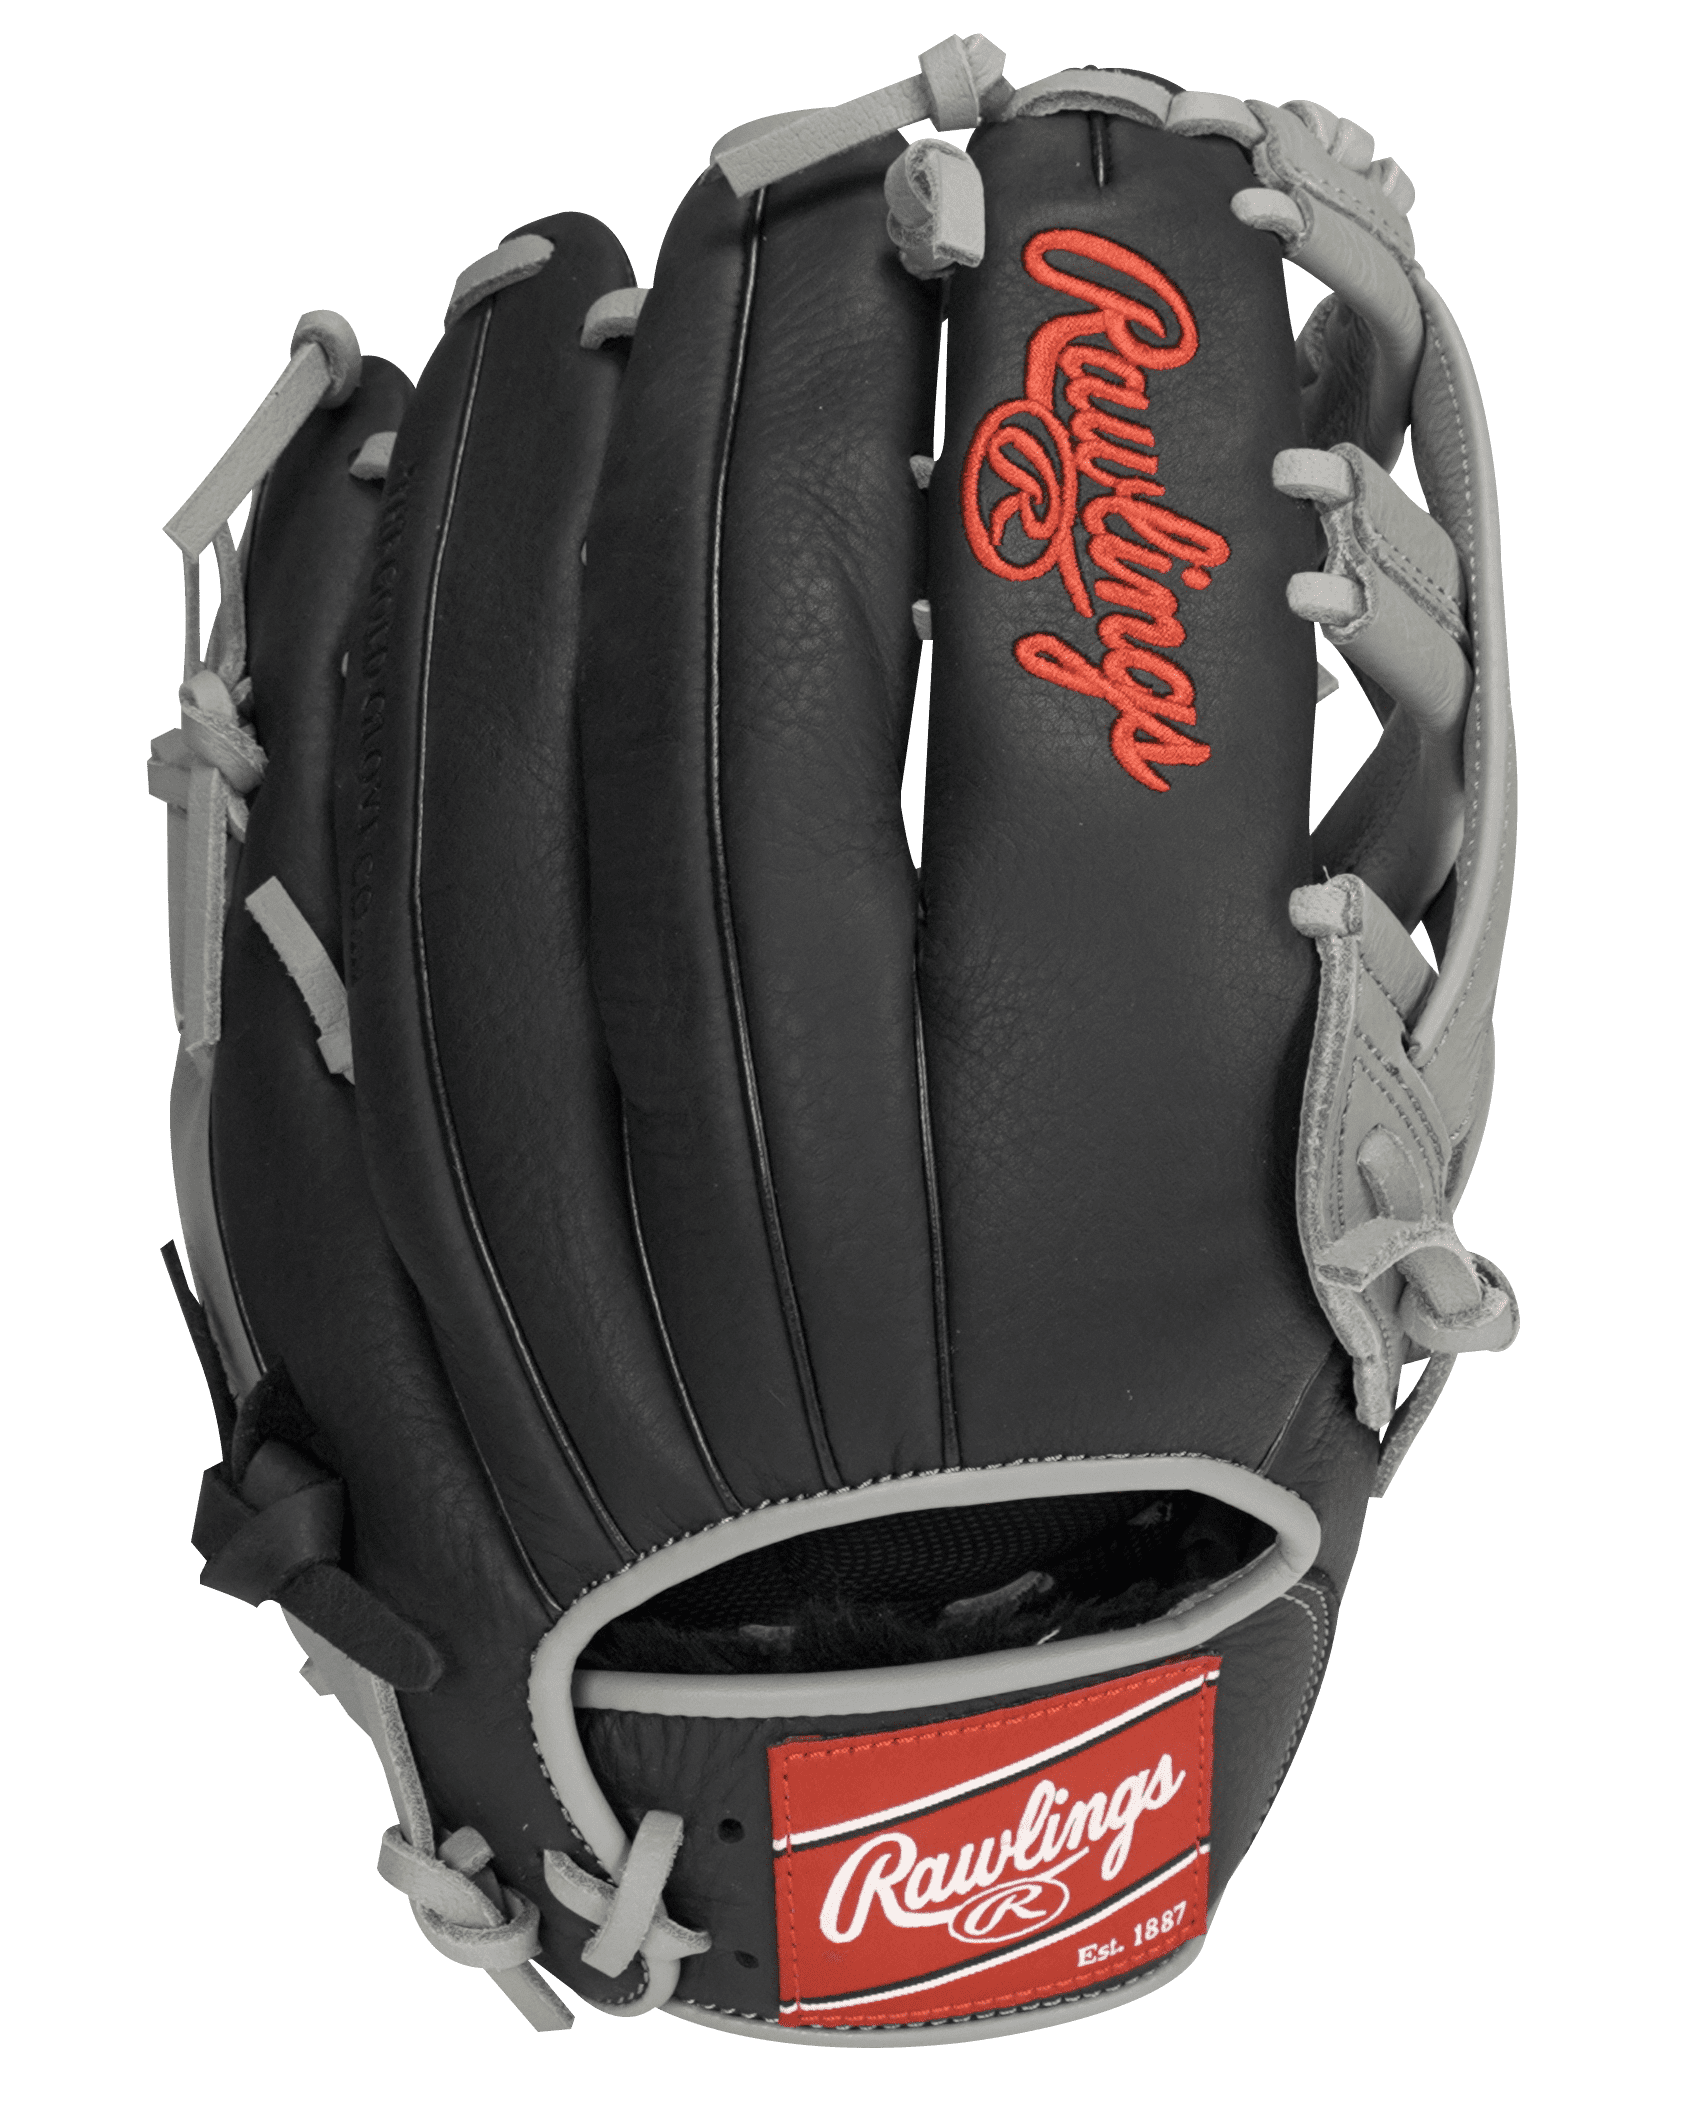 Rawlings Ss13w Softball Glove Leather Palm Basket Web for sale online 